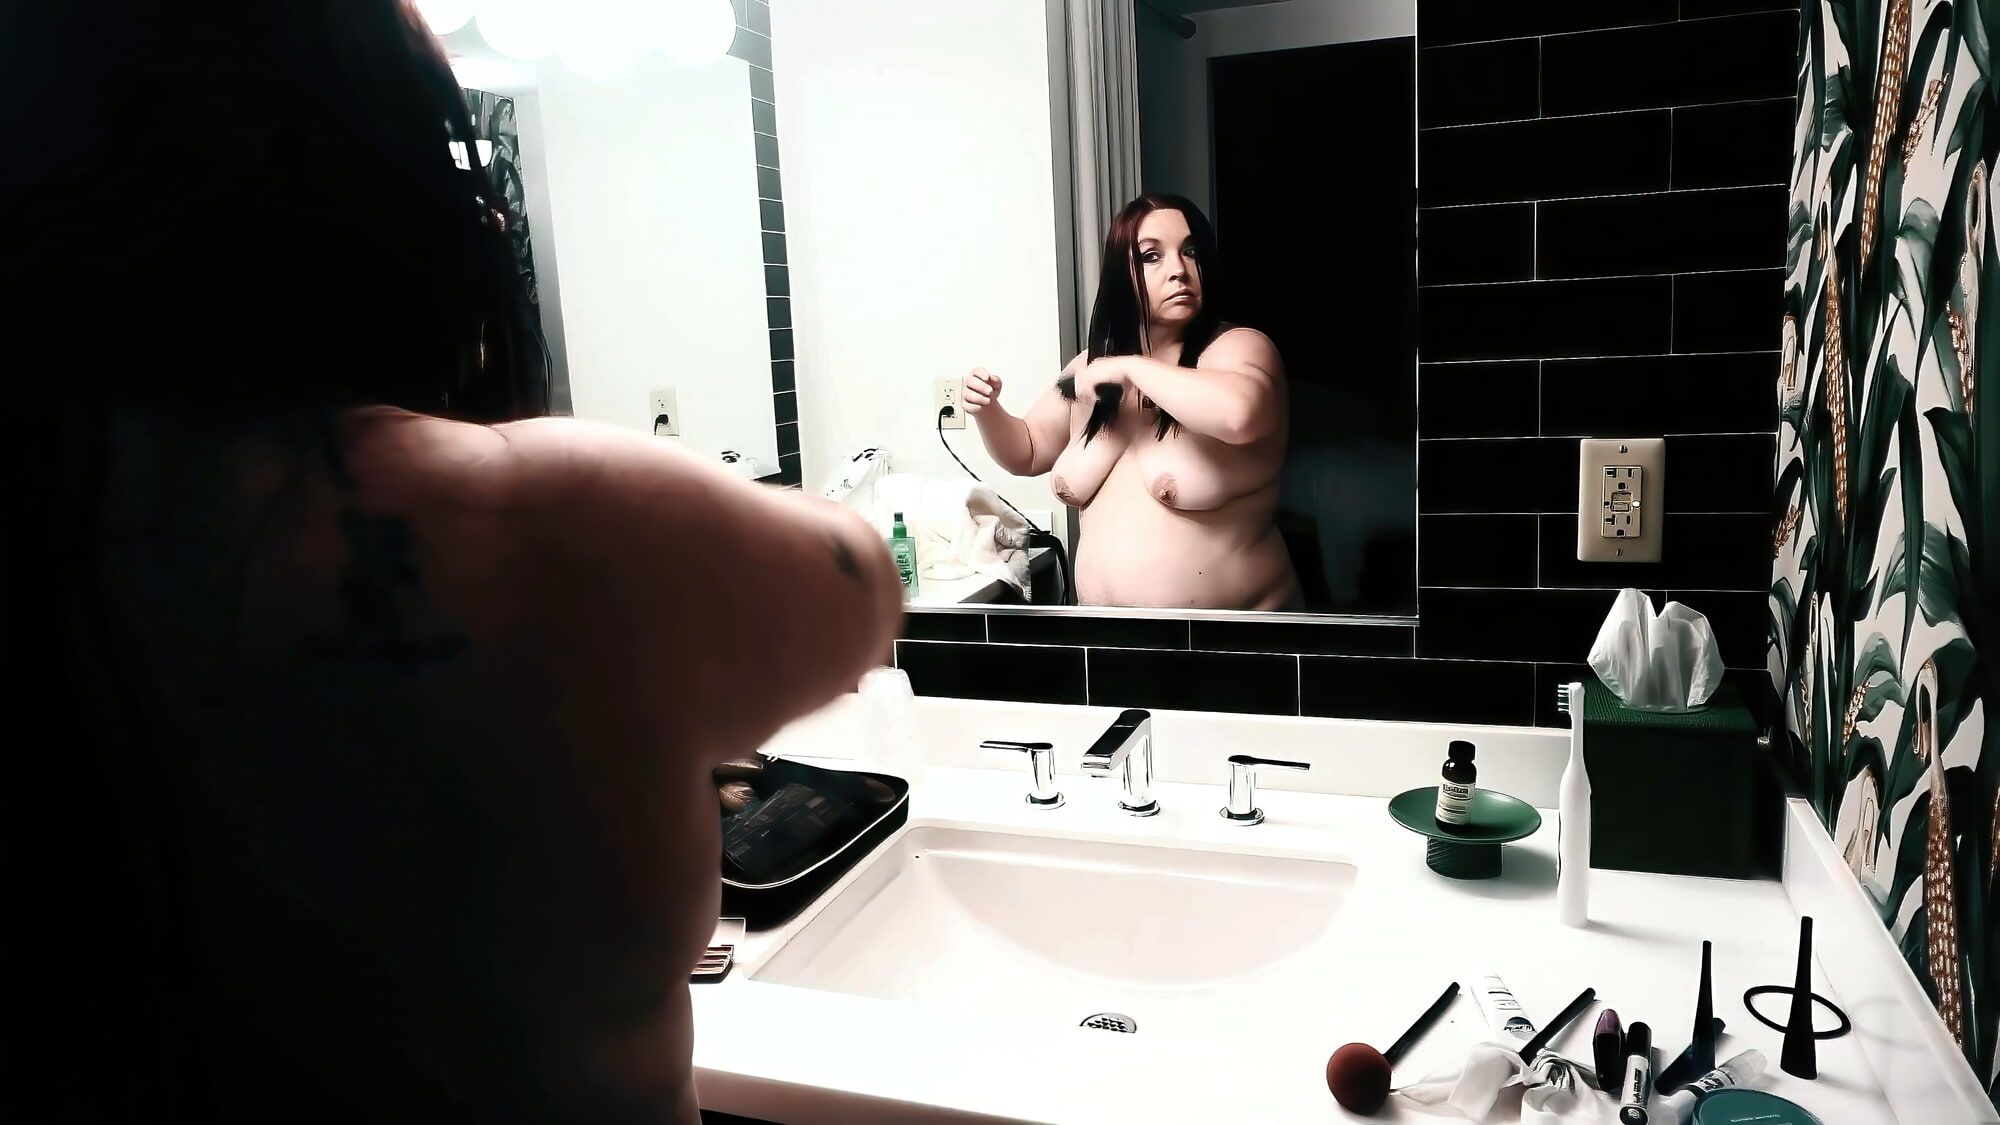 Sexy BBW Getting Ready For the Day #39